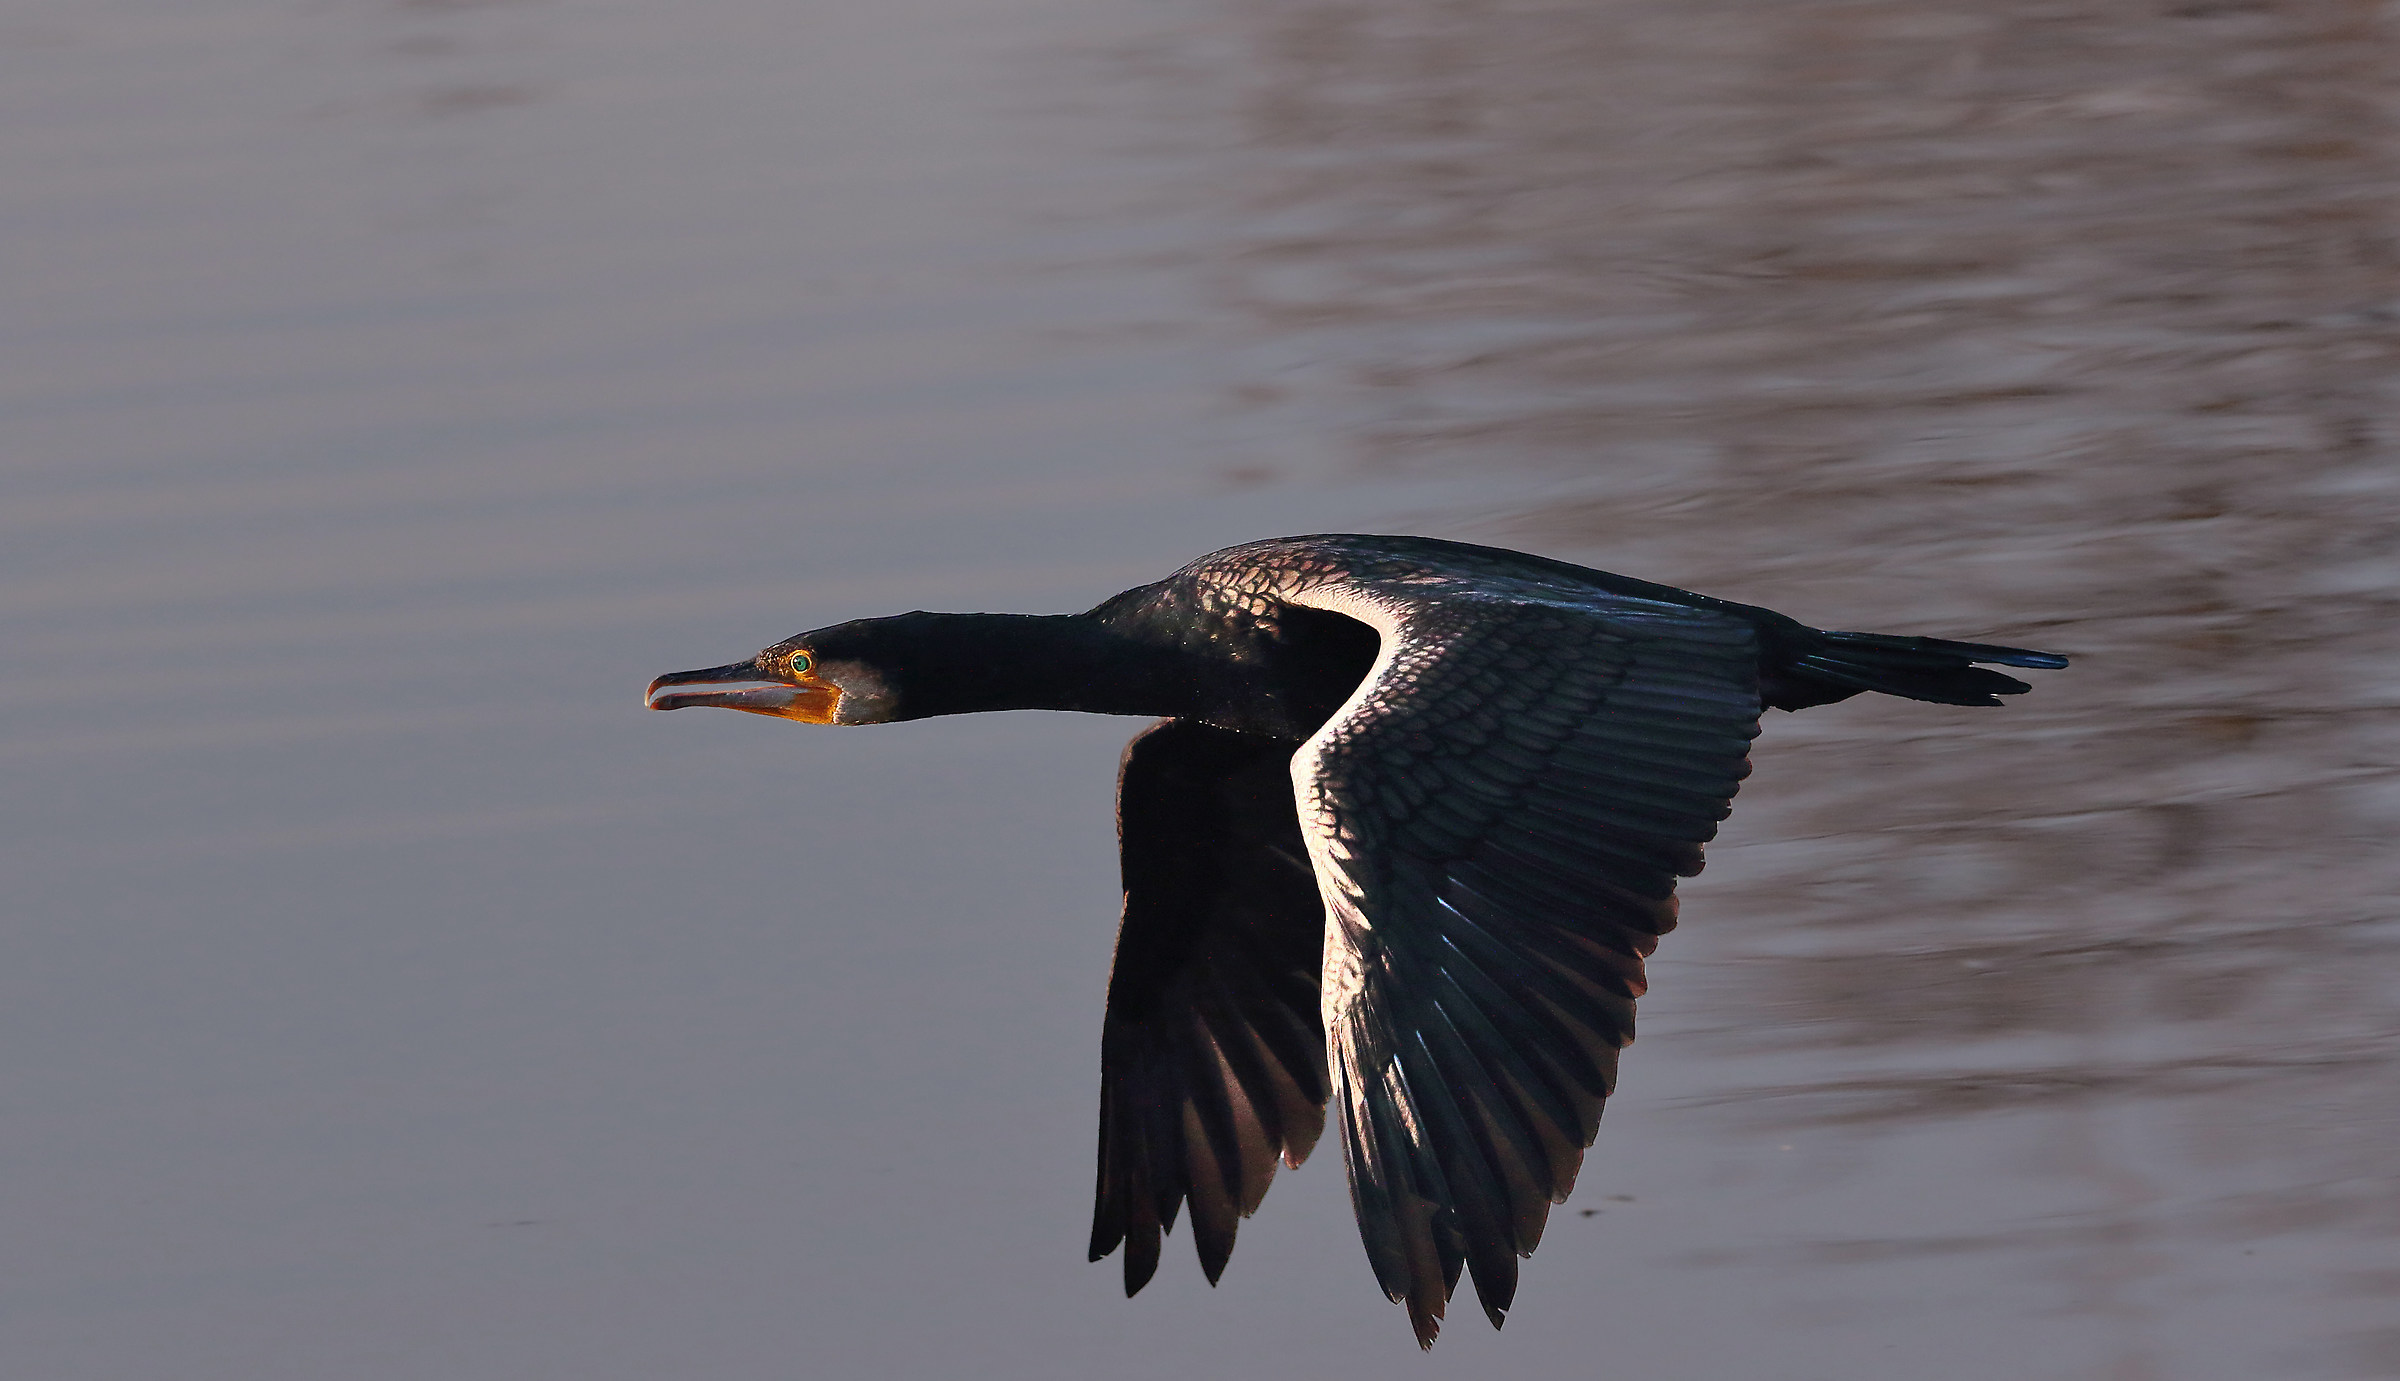 Cormorate at sunset...